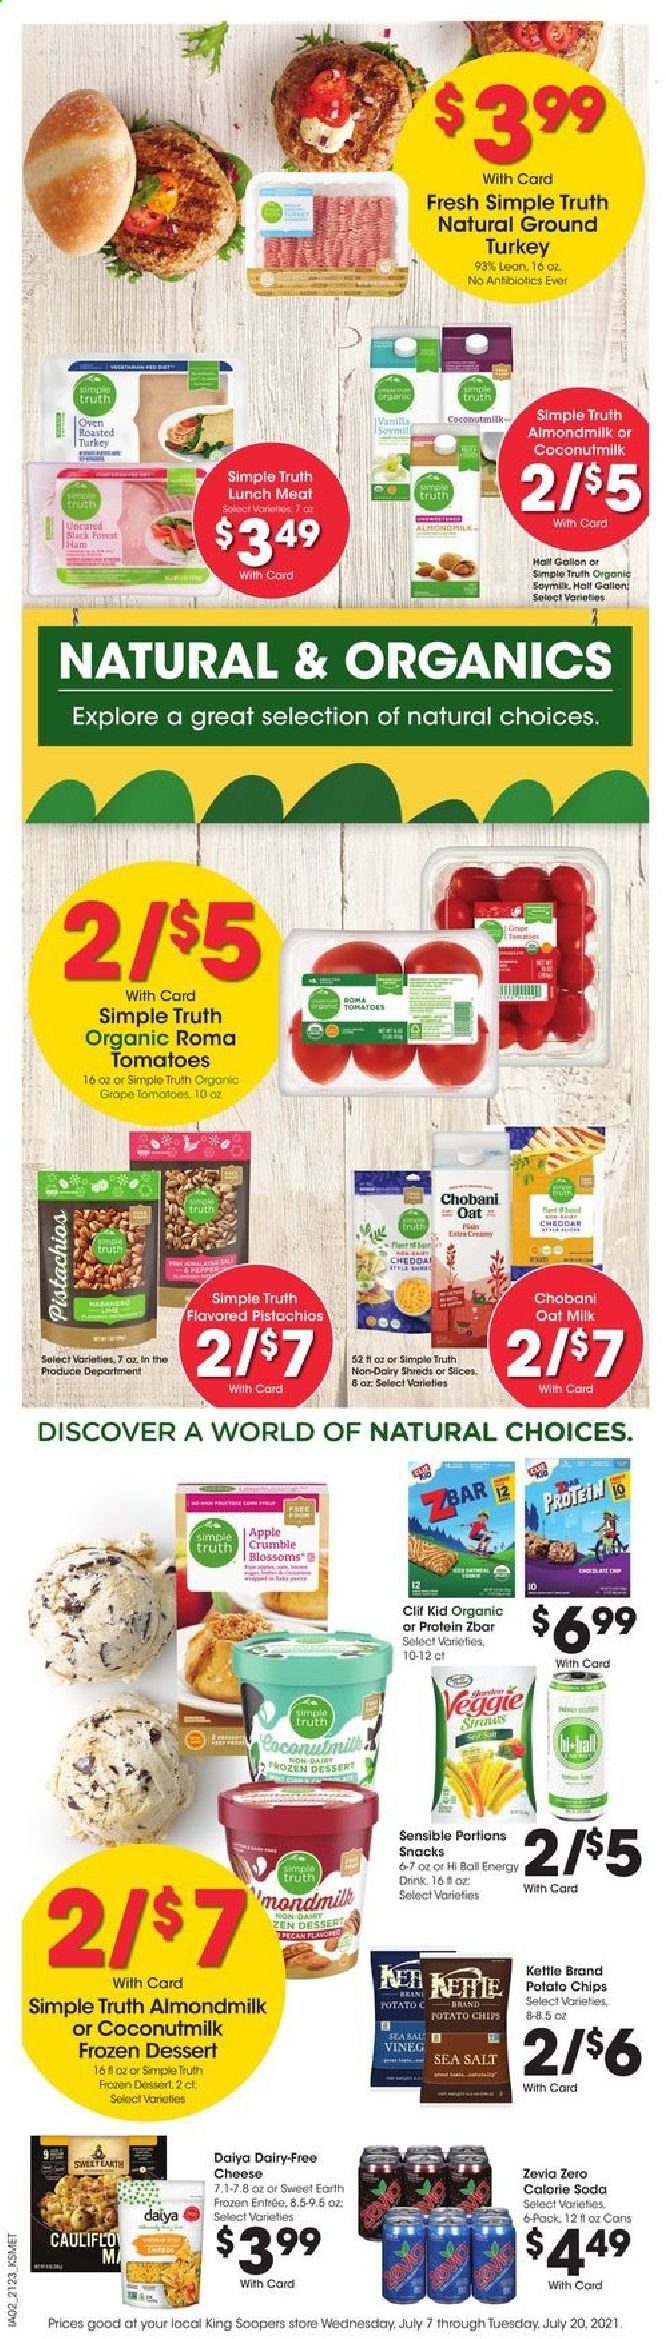 thumbnail - King Soopers Flyer - 07/07/2021 - 07/13/2021 - Sales products - Apple, lunch meat, cheese, Chobani, almond milk, milk, oat milk, snack, potato chips, coconut milk, pistachios, soda, ground turkey, oven. Page 7.